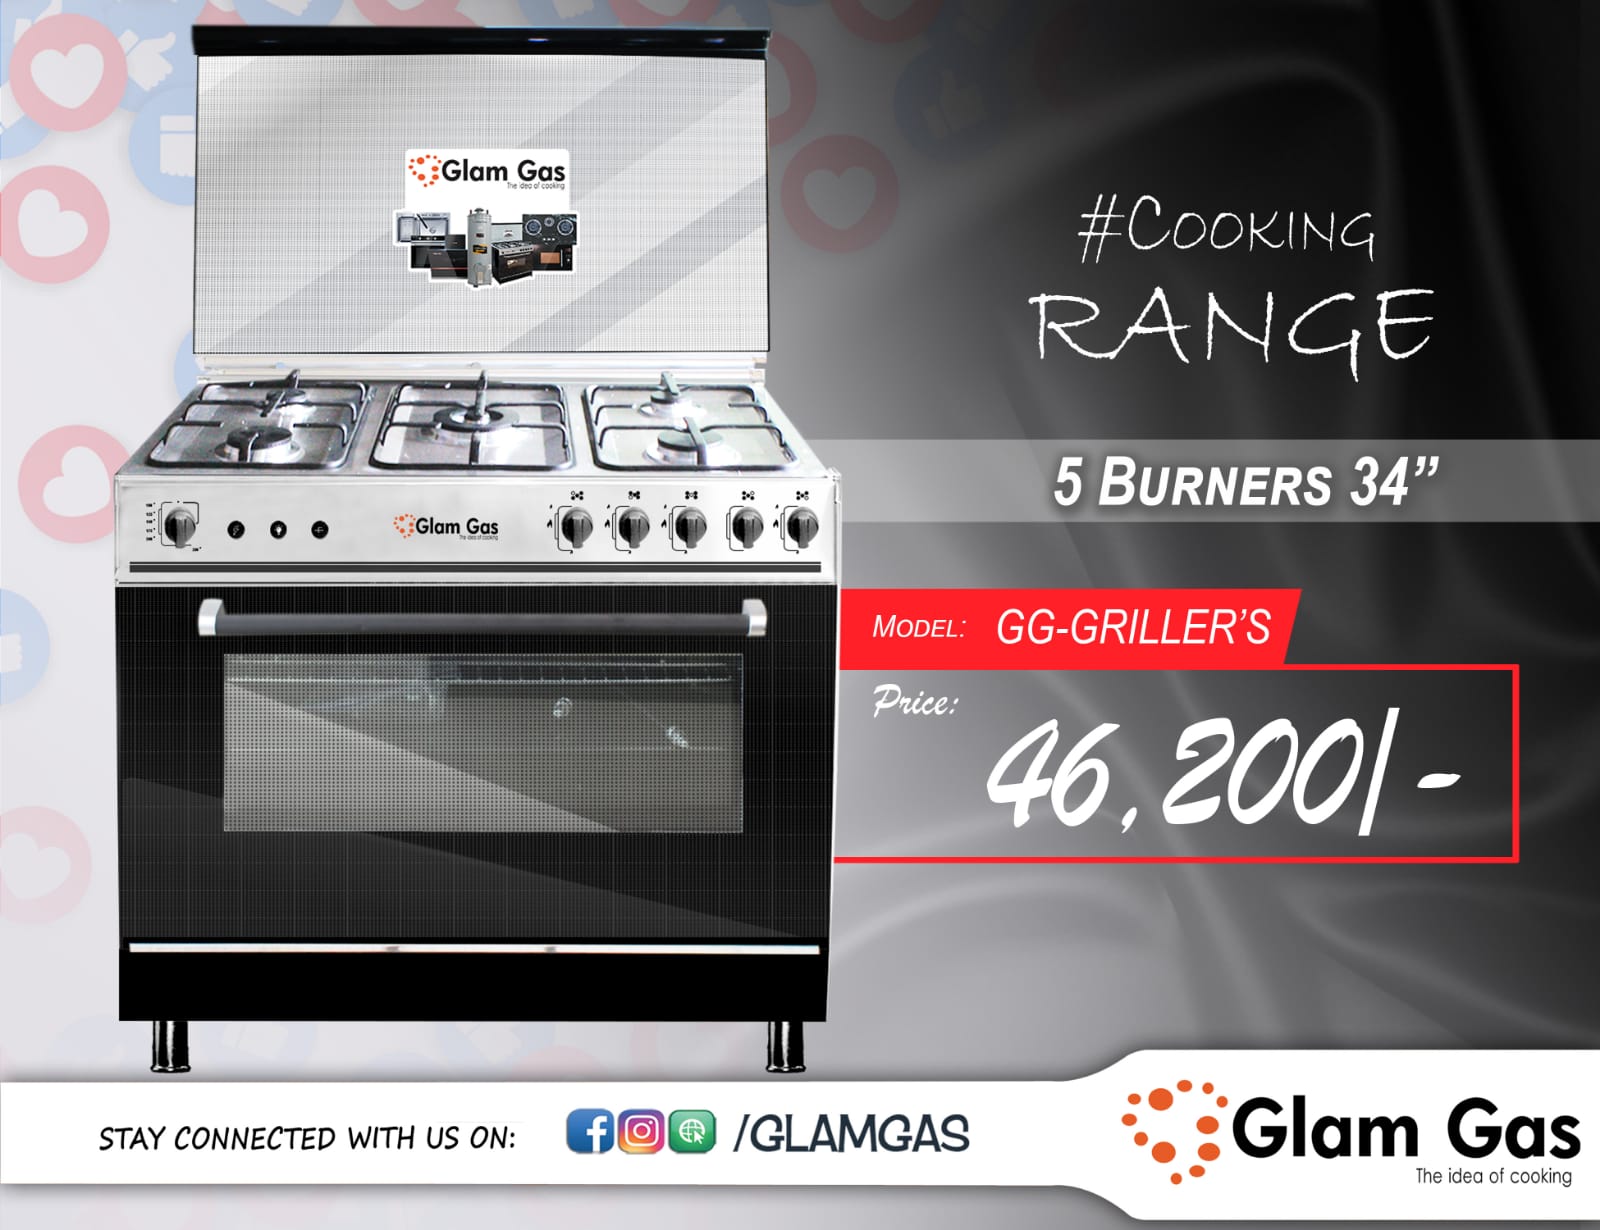 Glam Gas	Cooking Range Grillers 34